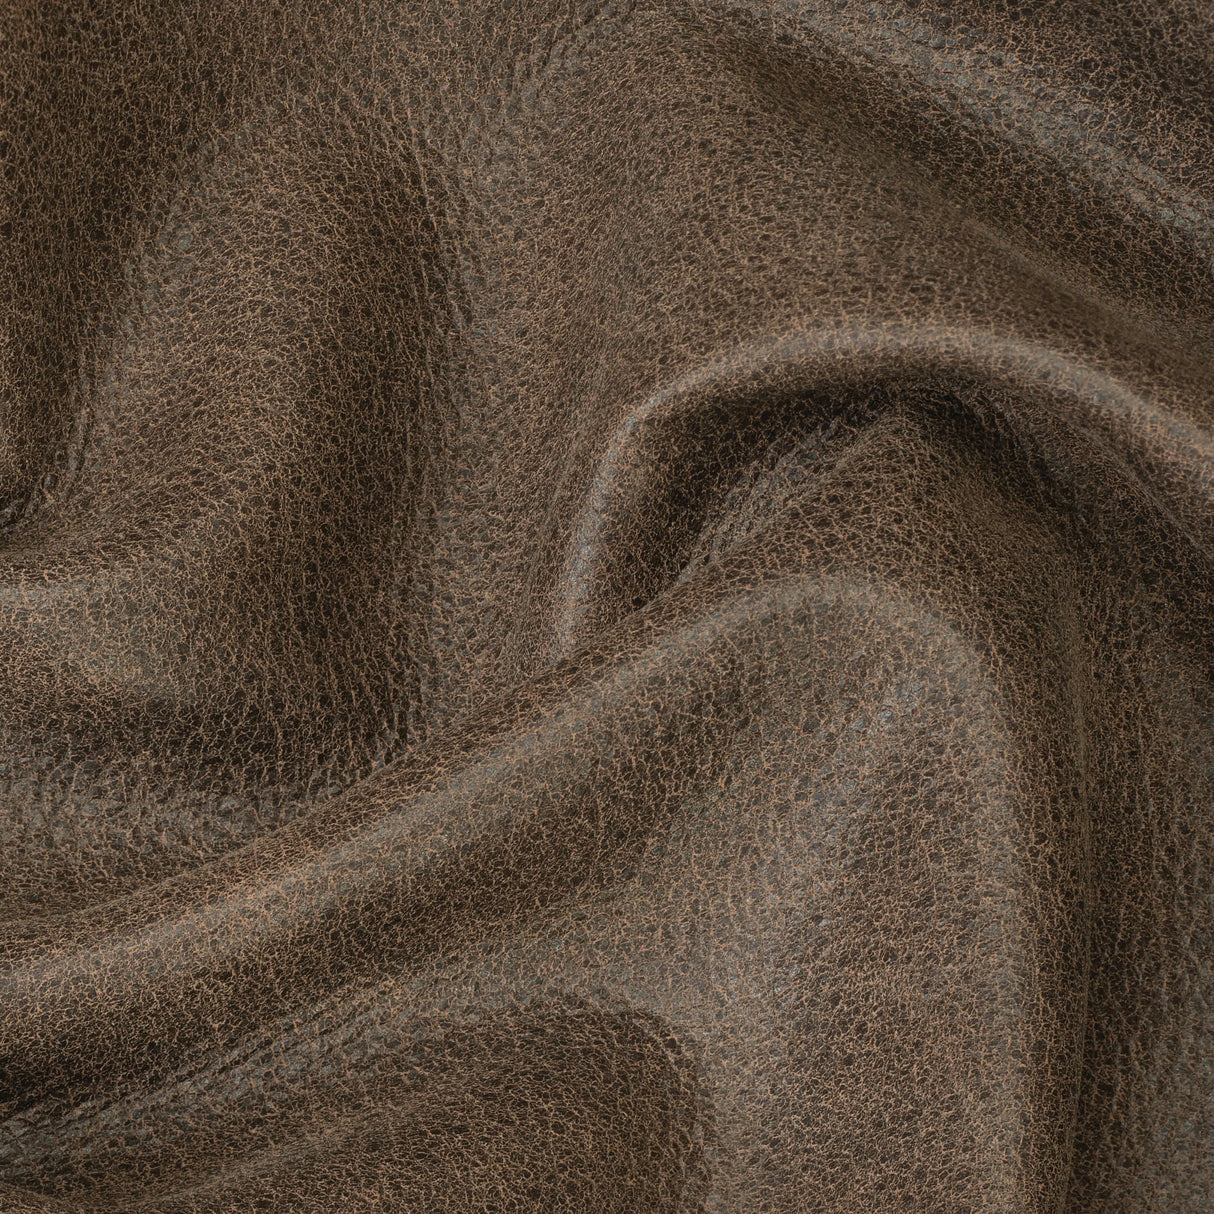 Upholstery Leather - Weaver Leather Supply